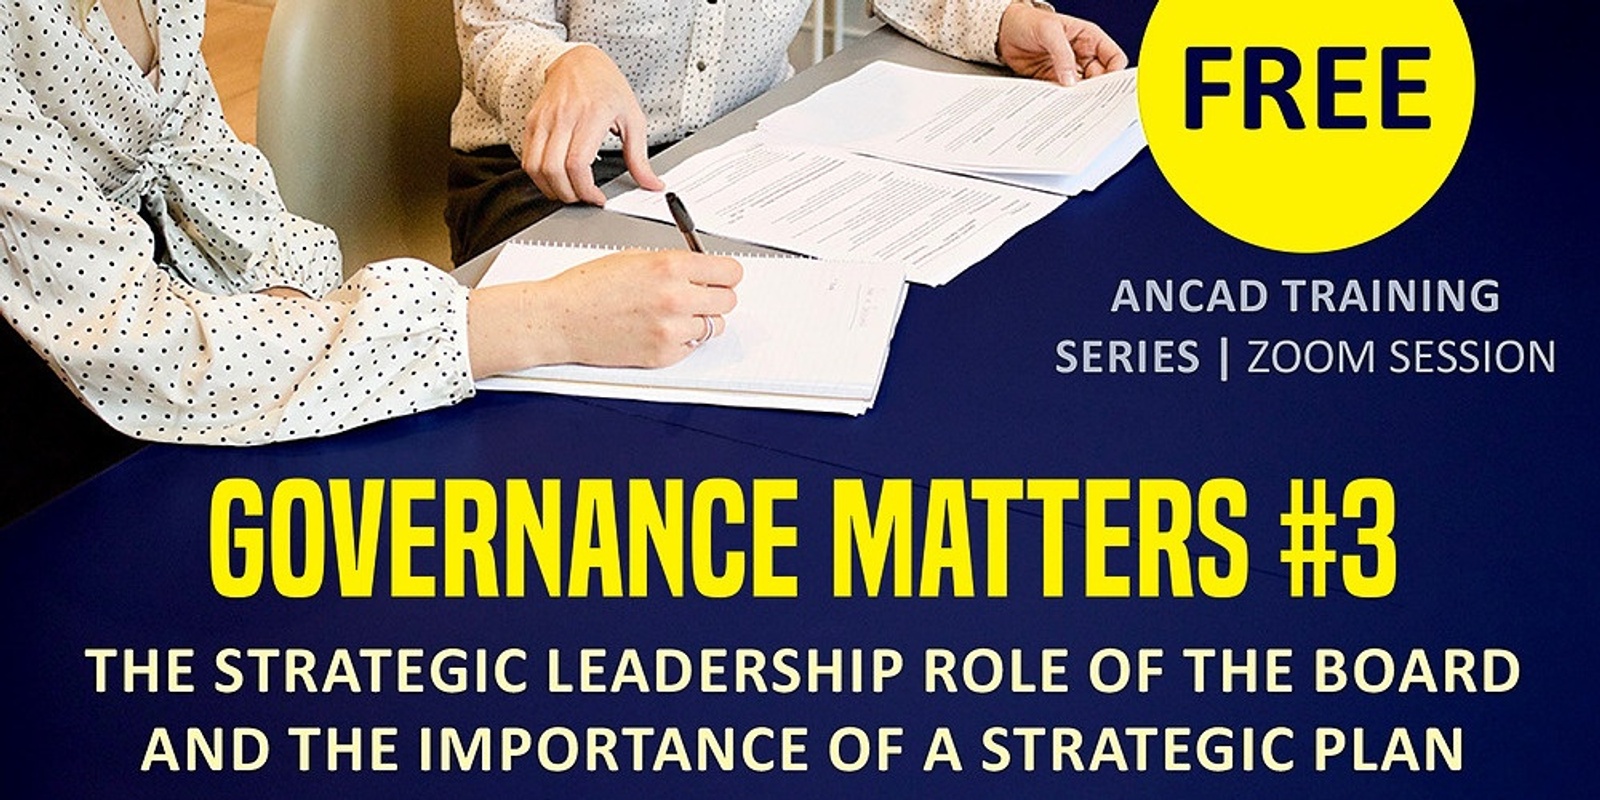 Banner image for GOVERNANCE MATTERS #3: The strategic leadership role of the Board and the importance of a strategic plan